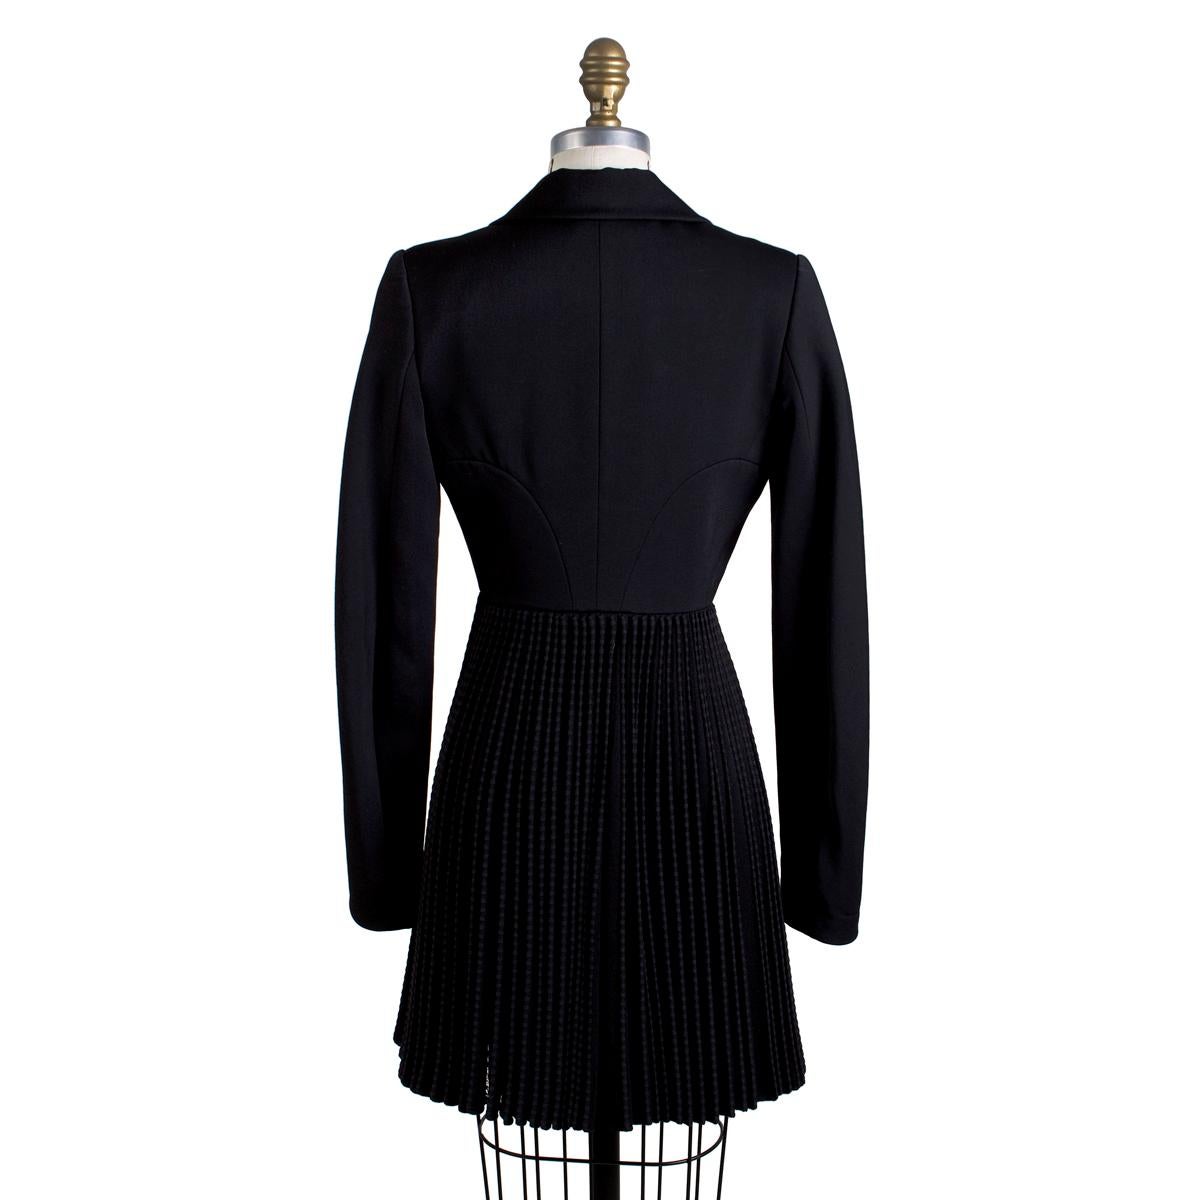 Coat by Azzedine Alaia
Accordion pleated skirt
Large lapel collar
Button closure in front
Black stretch wool knit fabric
Condition: Excellent
Size/Measurements:
Size 36
15